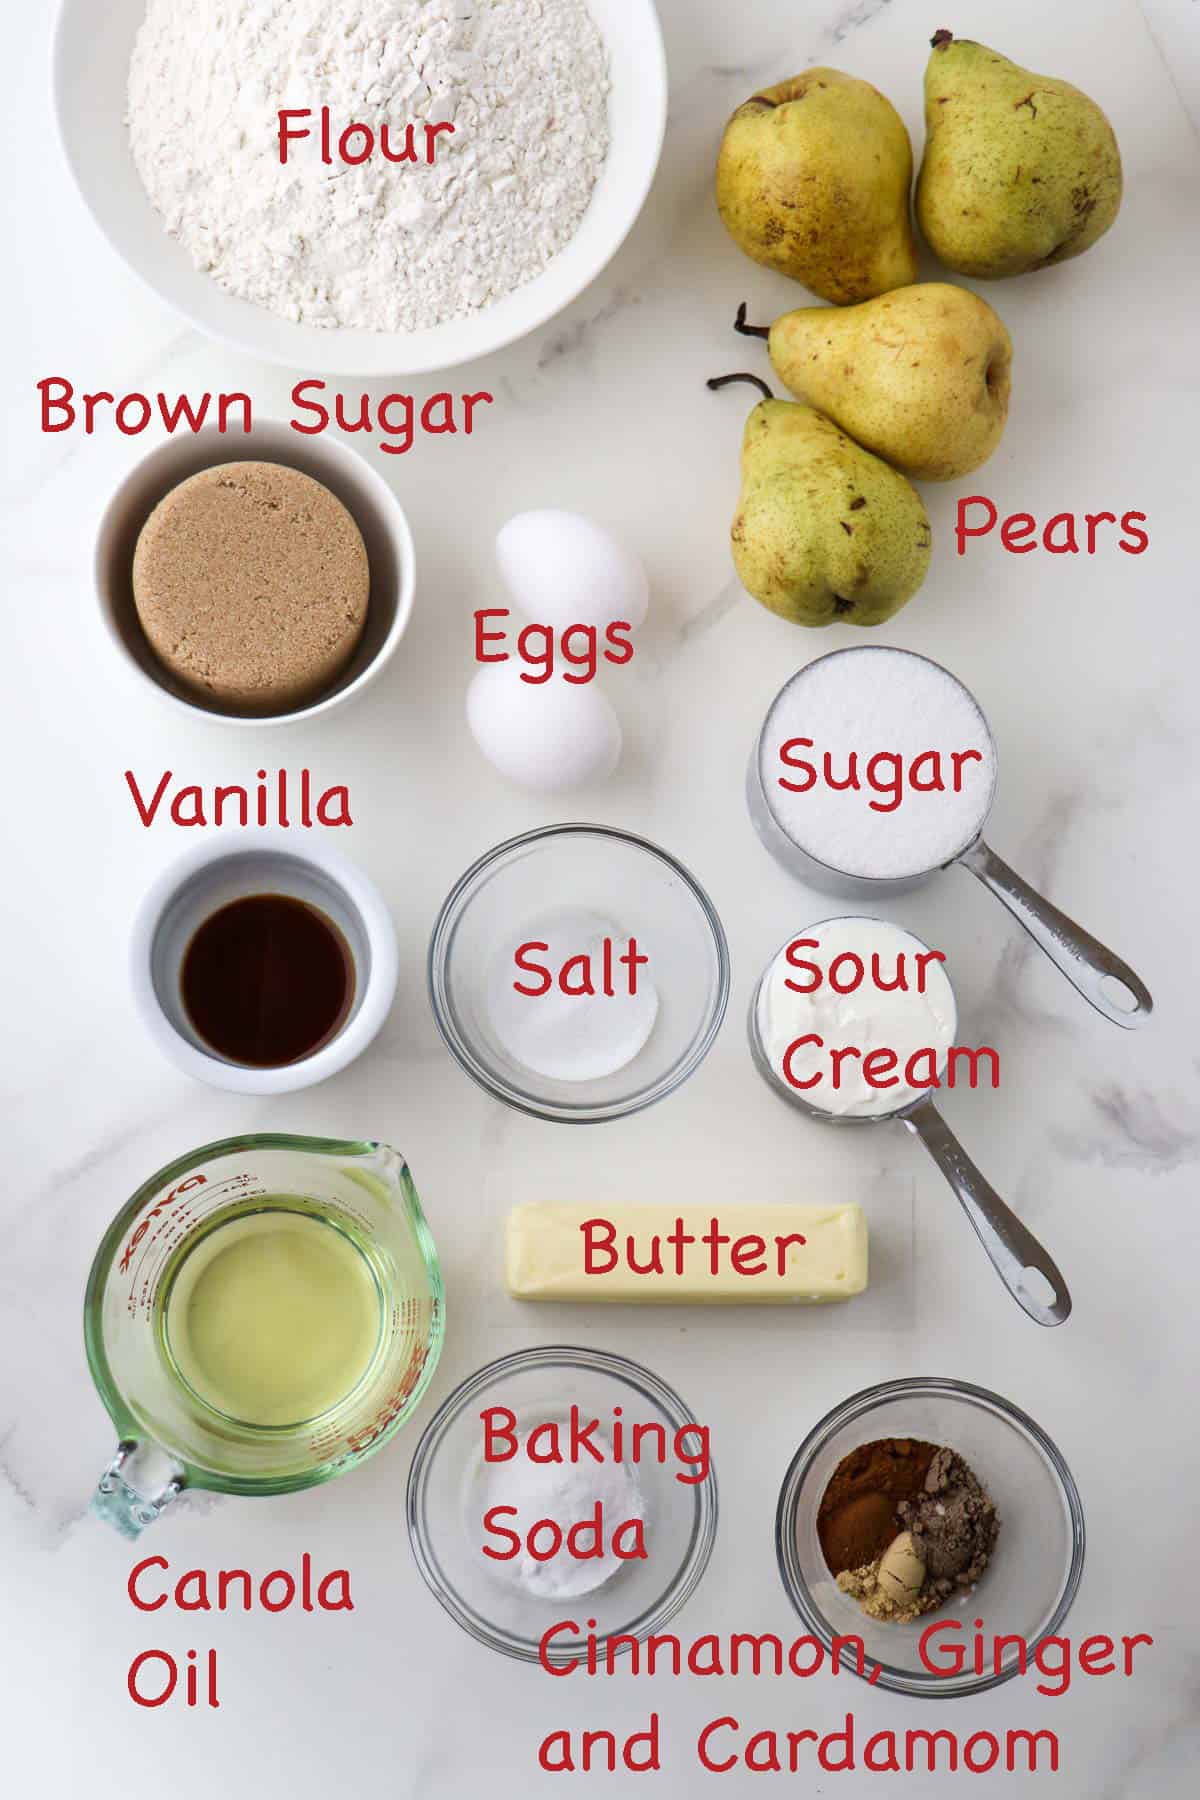 Labeled ingredients for Spiced Pear Cake with Cardamom.